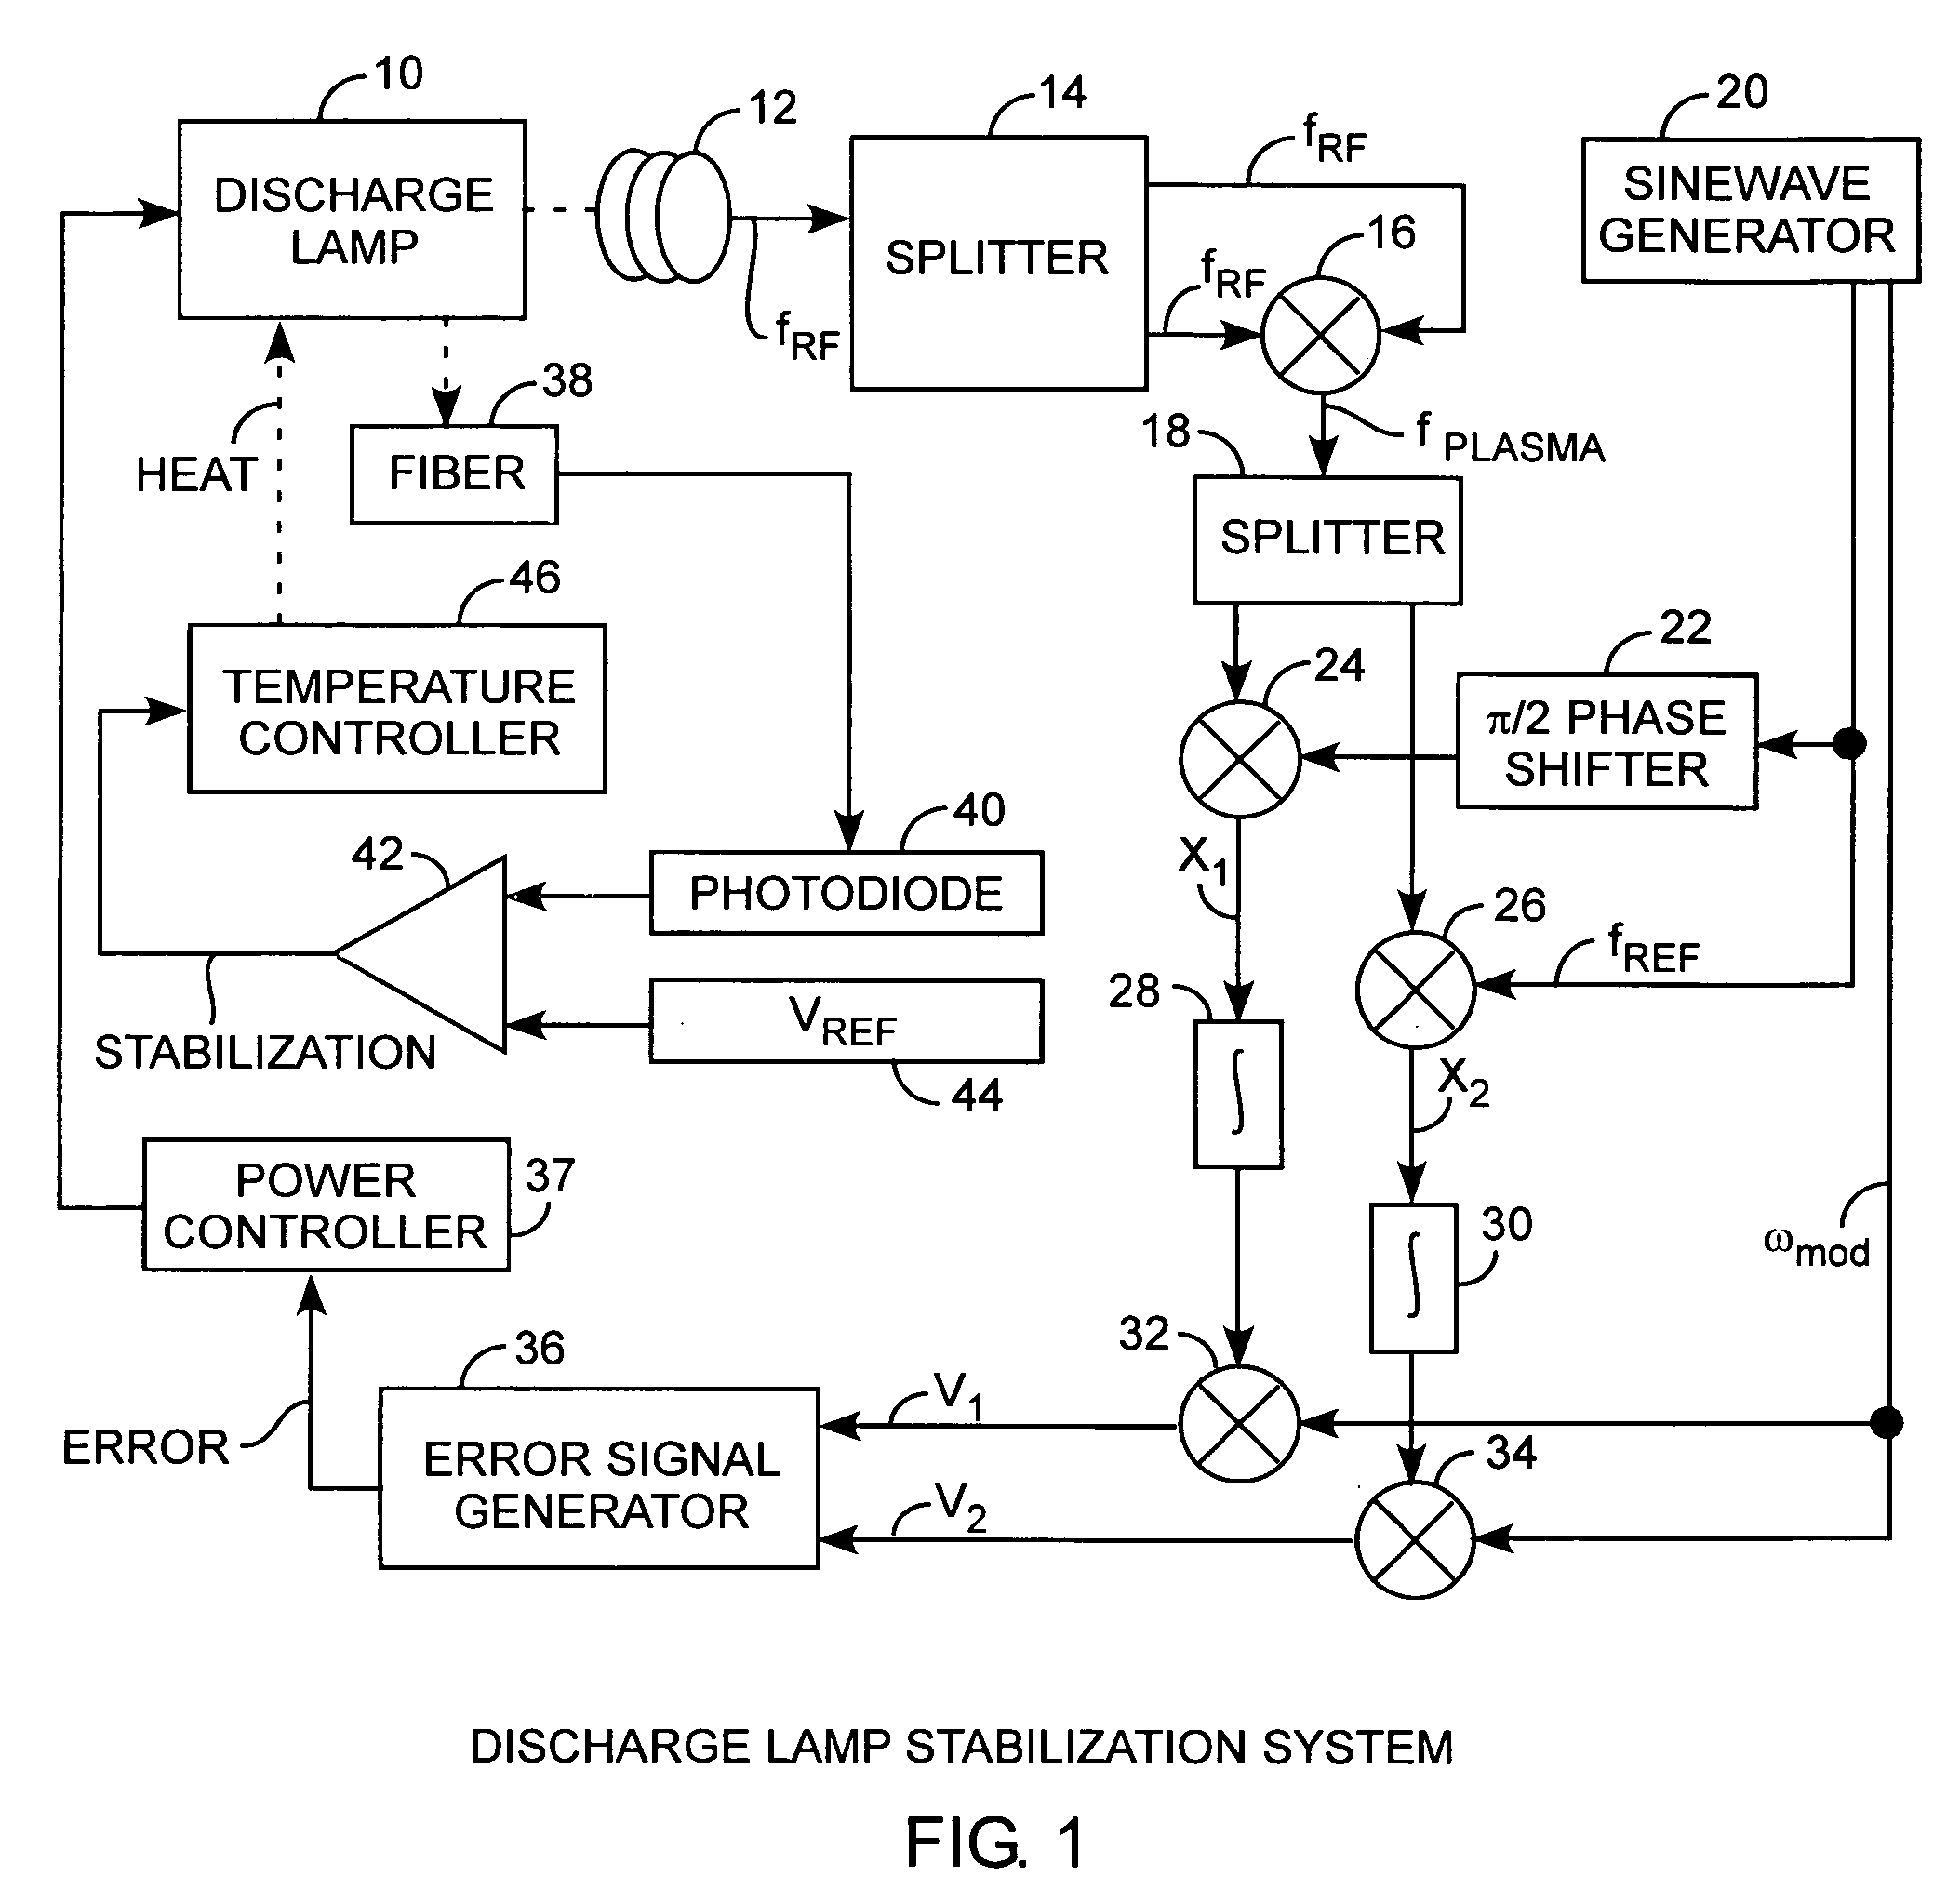 Discharge lamp stabilization system